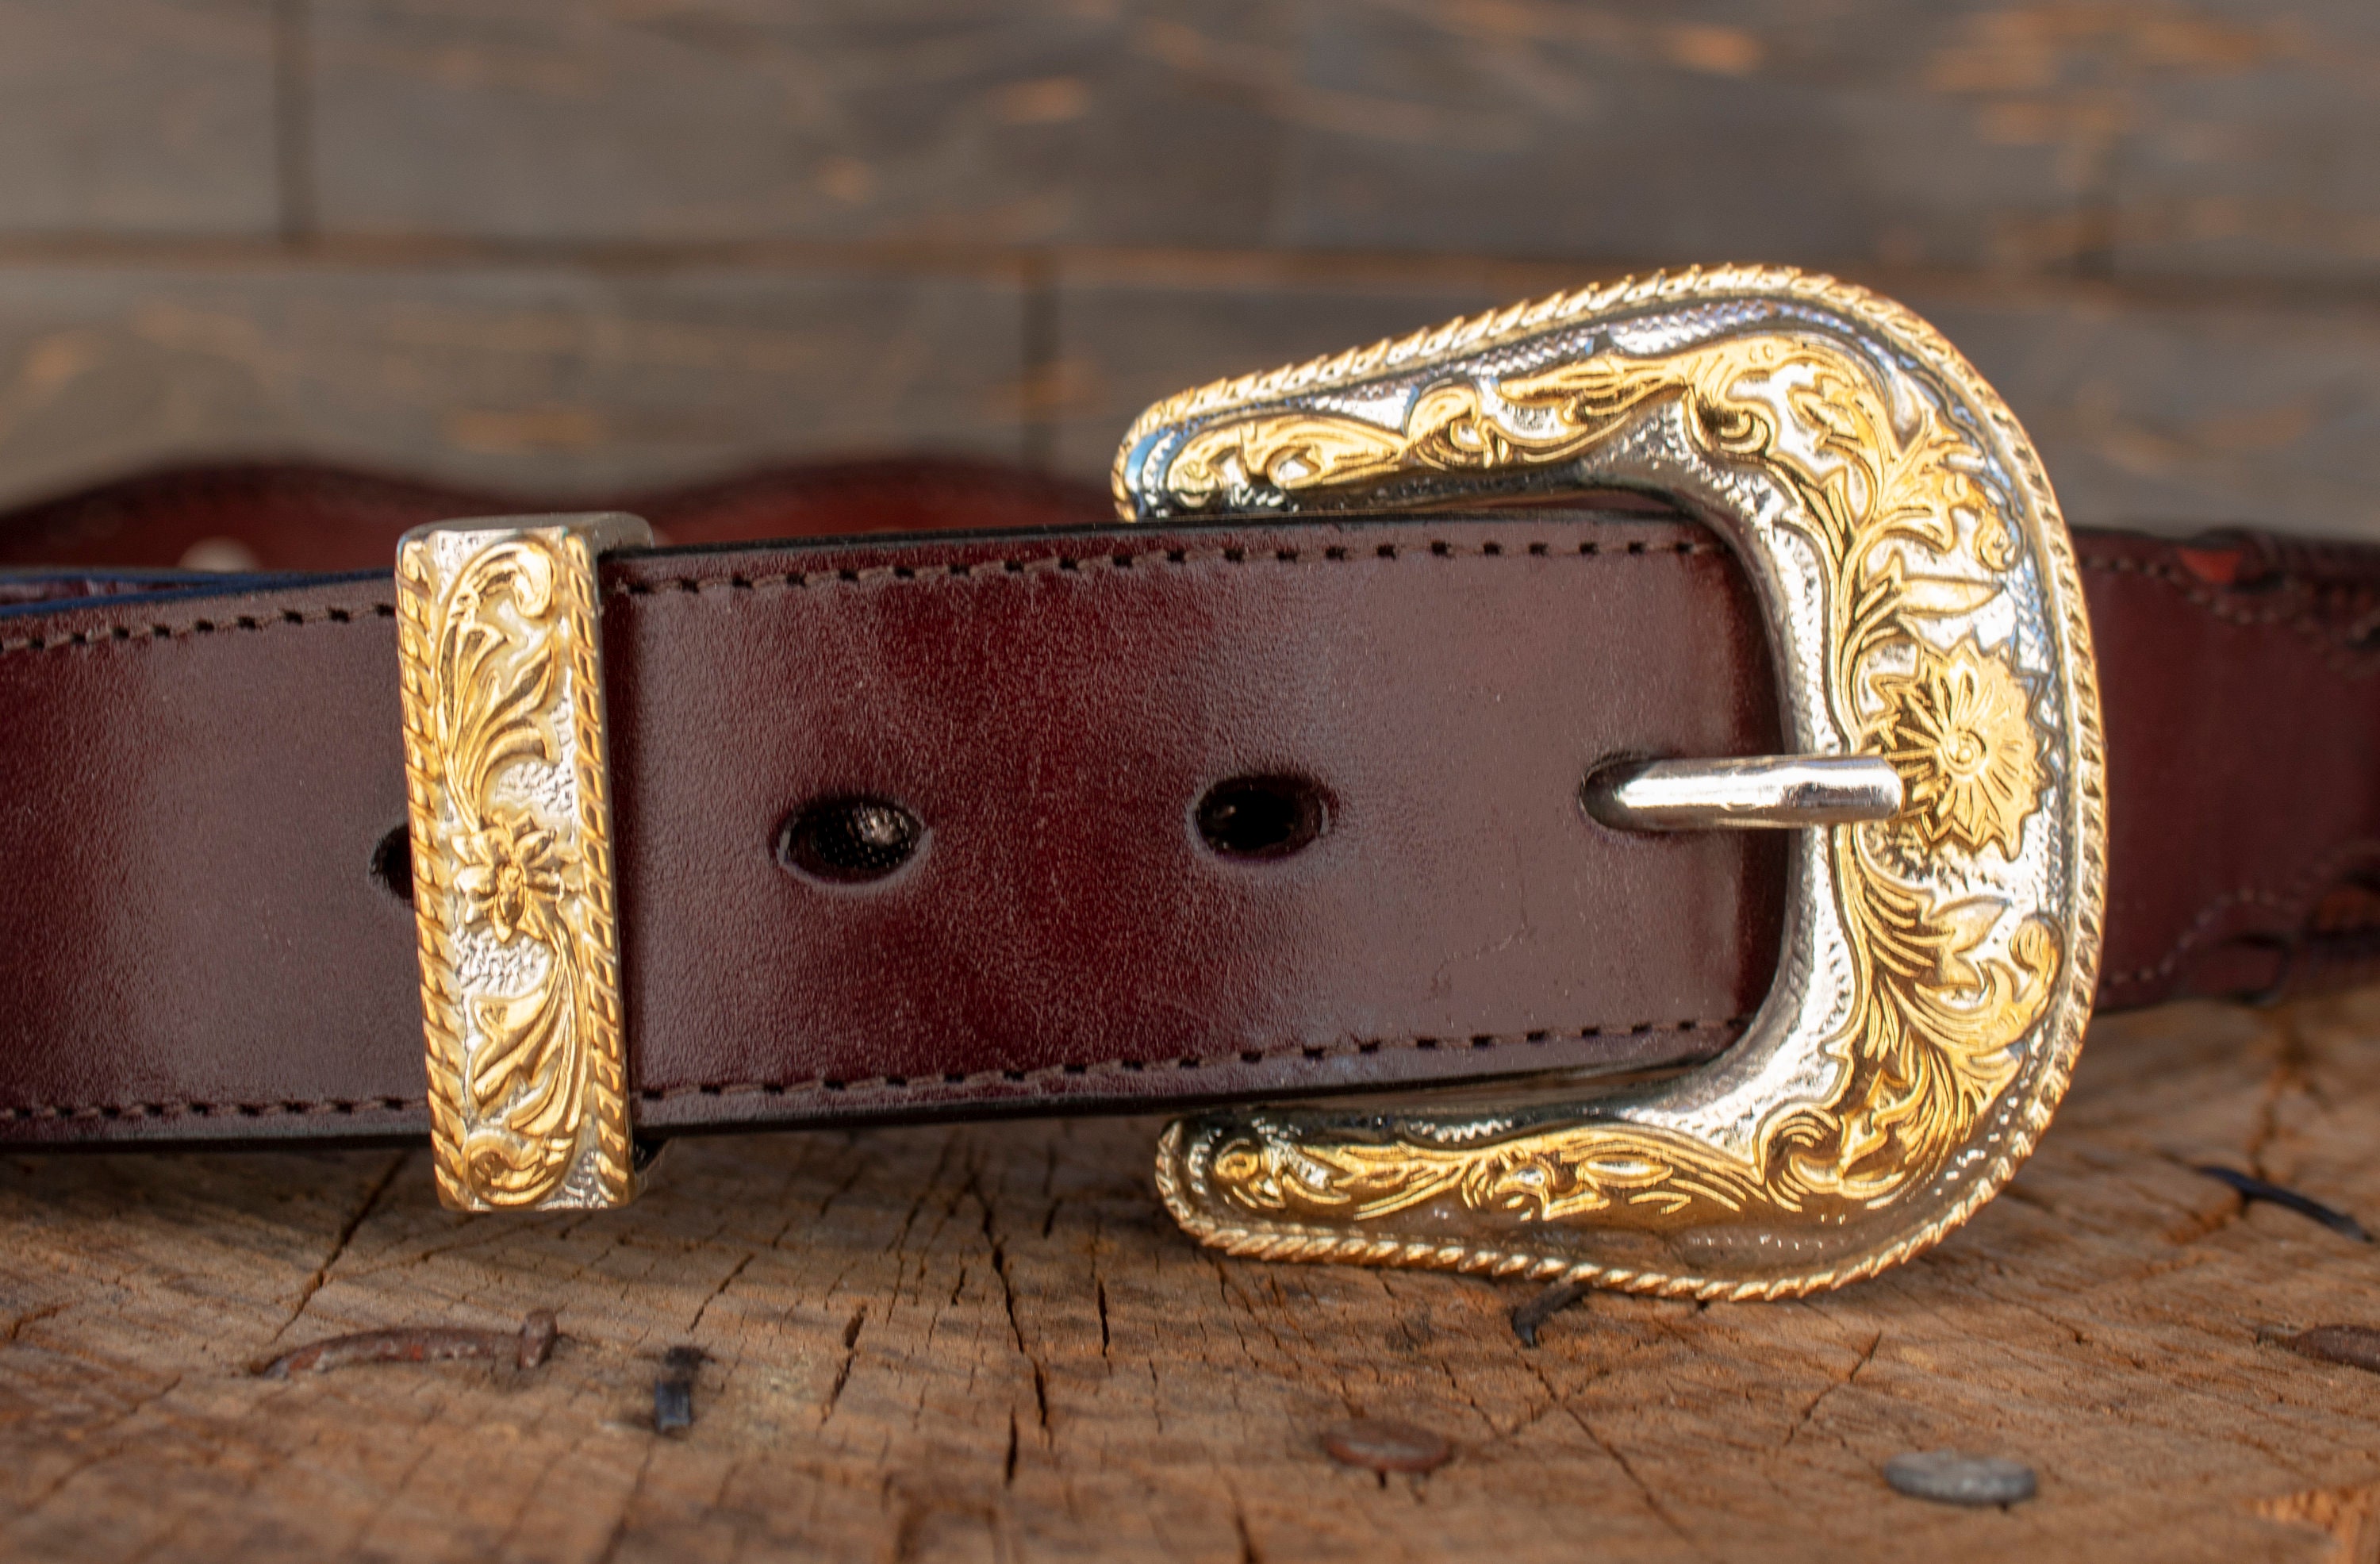 Mens LEATHER CONCHO WESTERN Cowboy Rodeo Belt - Etsy